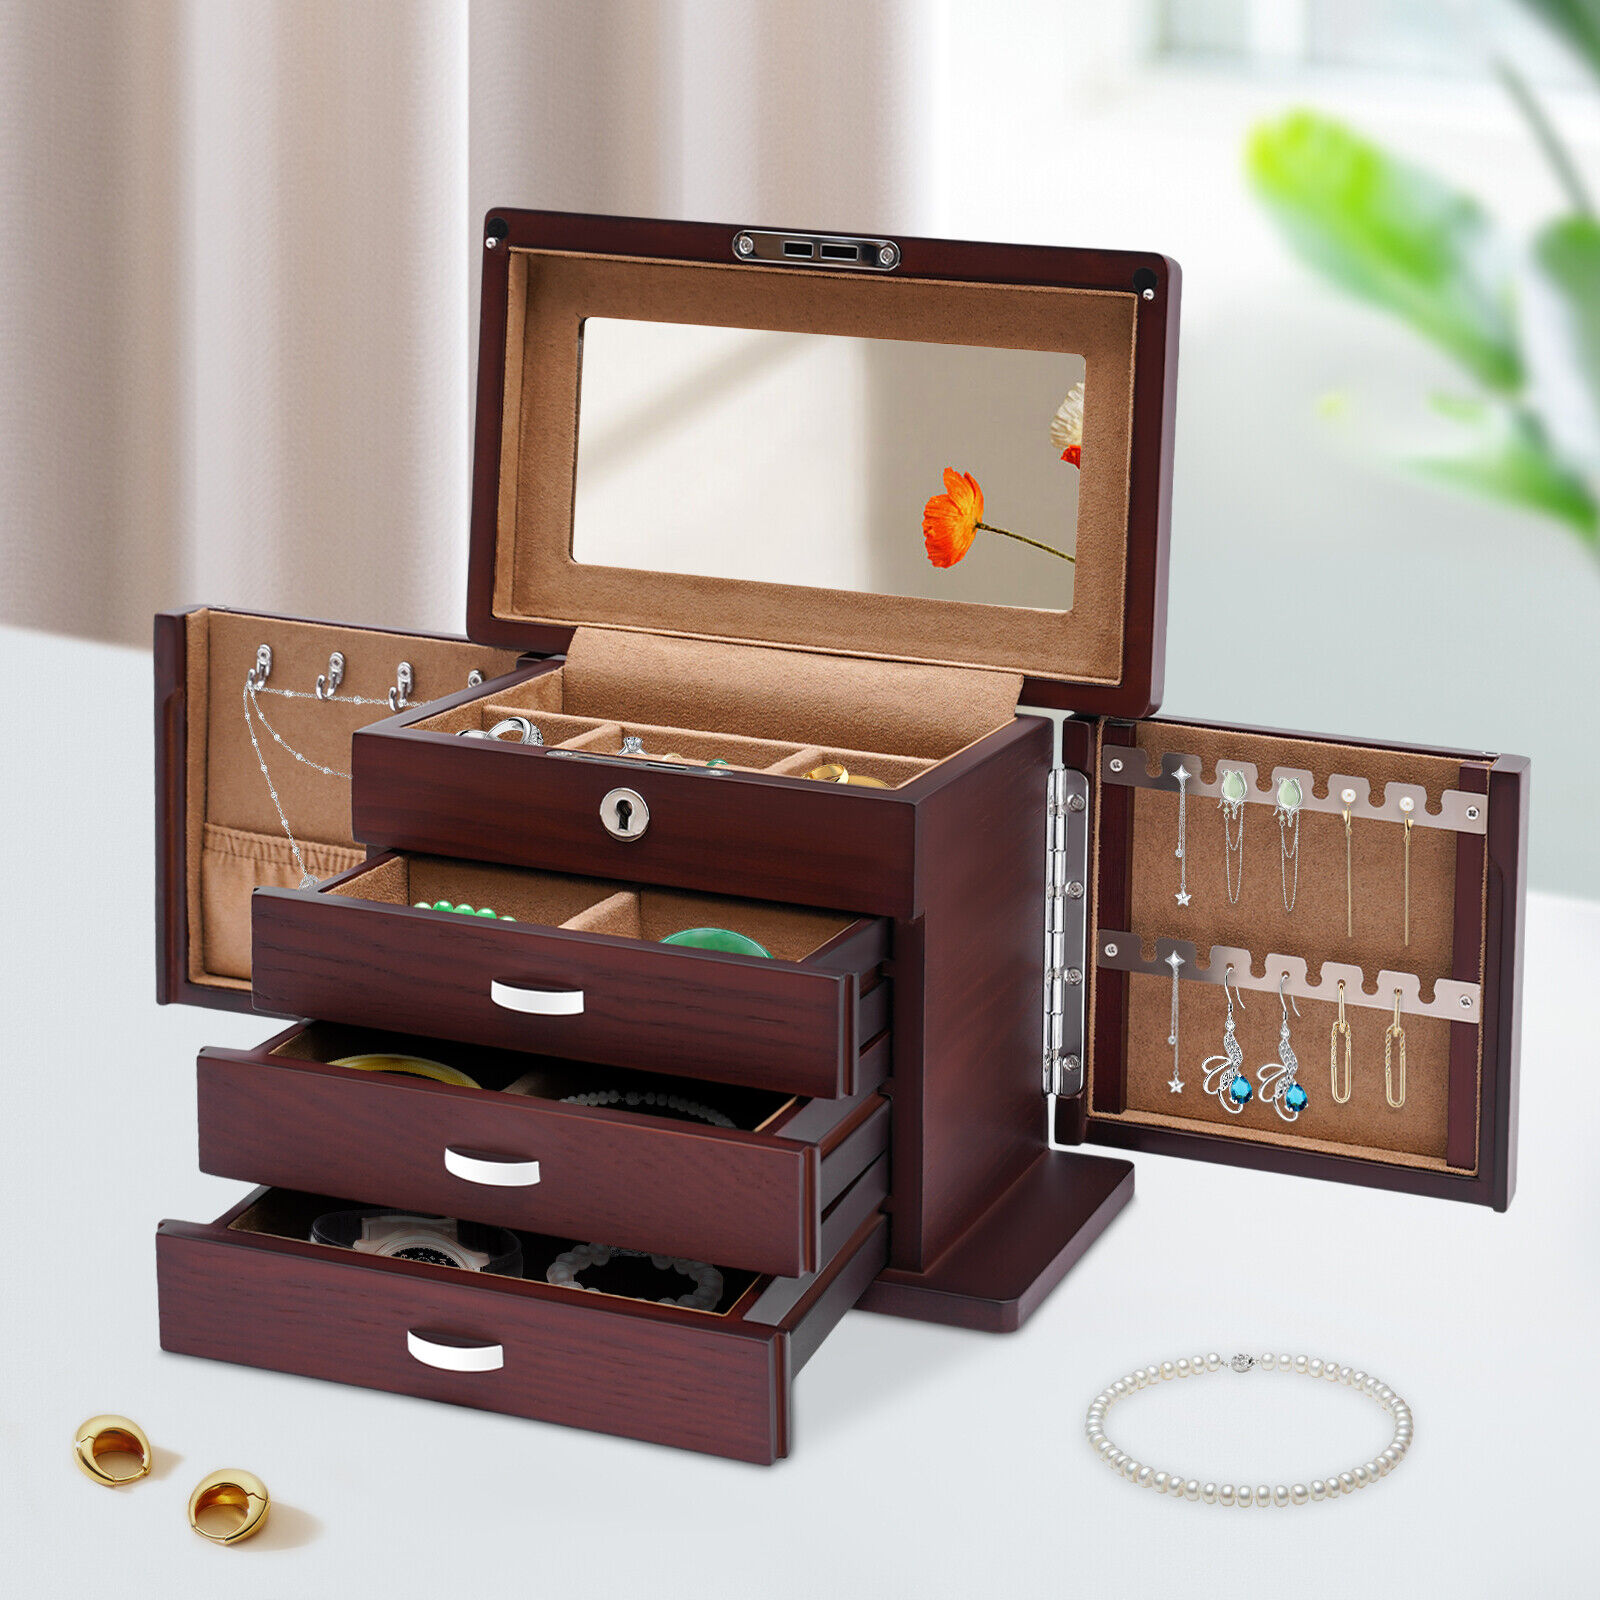 4-Layer Large Wooden Jewelry Box Large Wooden Jewelry Box with Drawers Key Lock